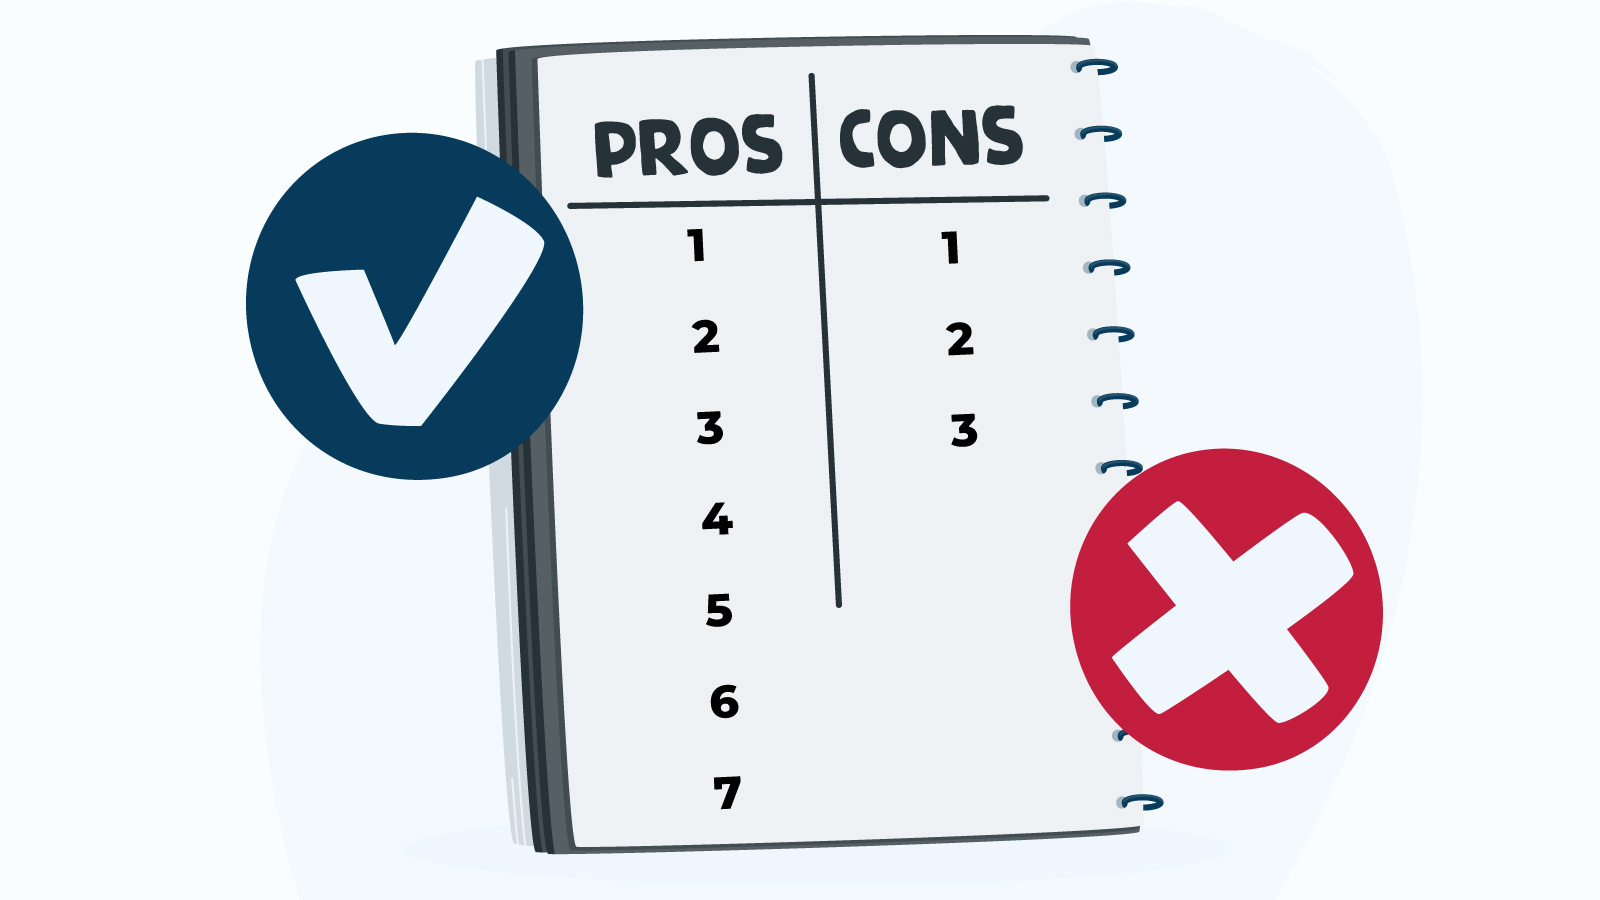 MuchBetter casino pros and cons